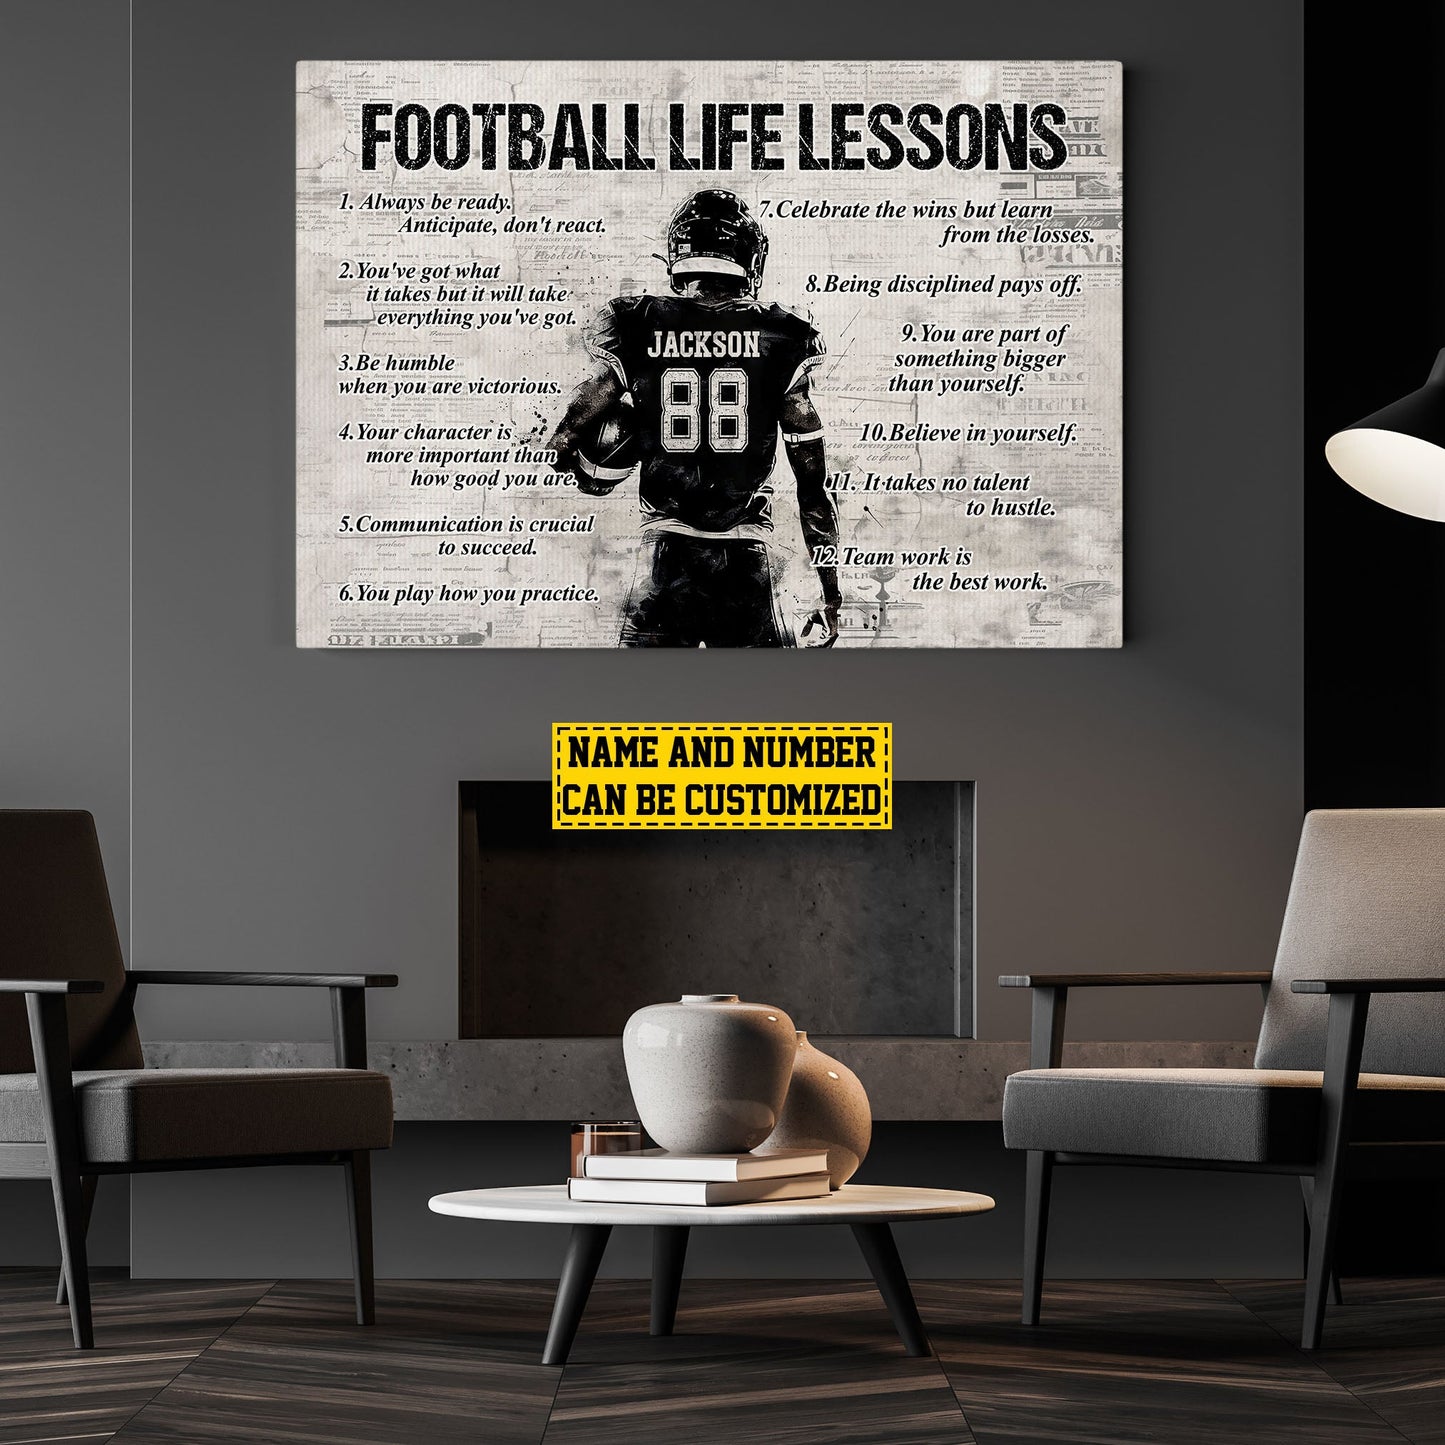 Football Life Lessons, Personalized Motivational Football Boy Canvas Painting, Inspirational Quotes Wall Art Decor, Poster Gift For Football Lovers